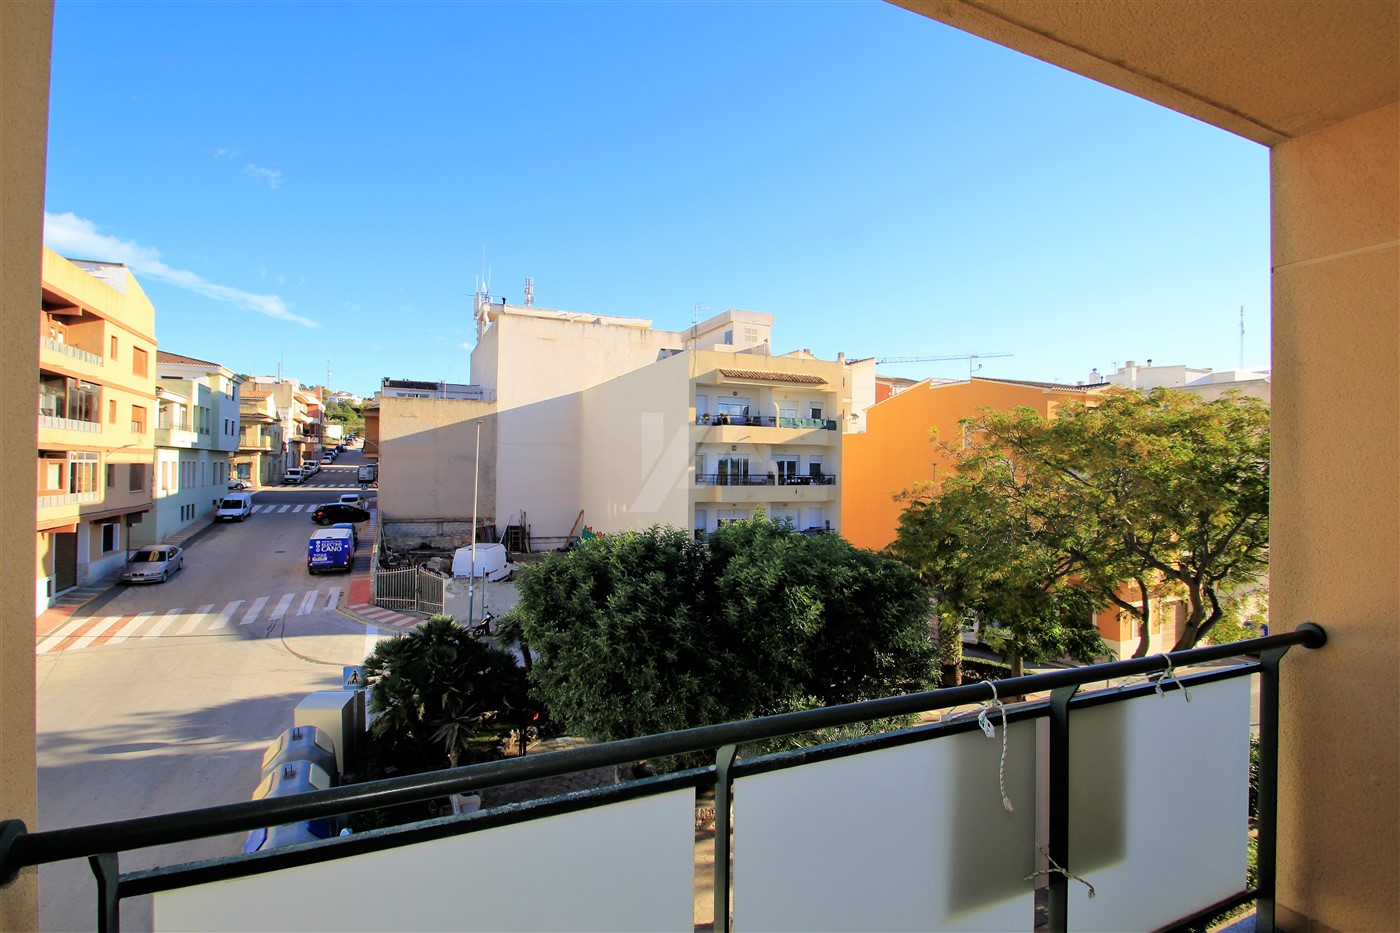 Flat for sale in the centre of Teulada, Costa Blanca.